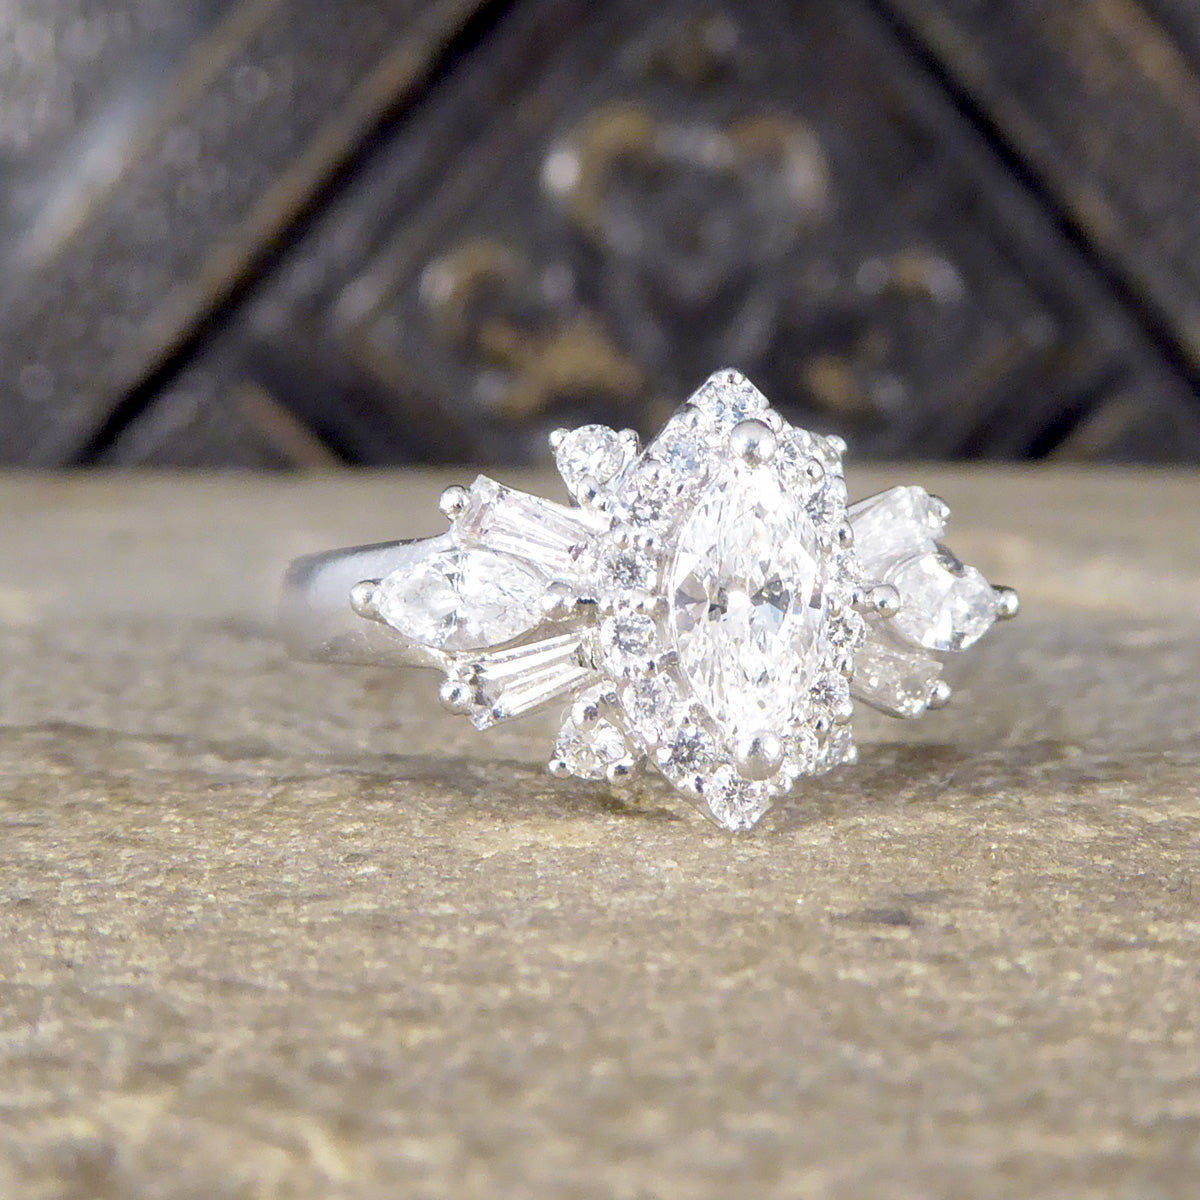 Contemporary 1.00ct Diamond Marquise Cluster Dress Ring in Platinum